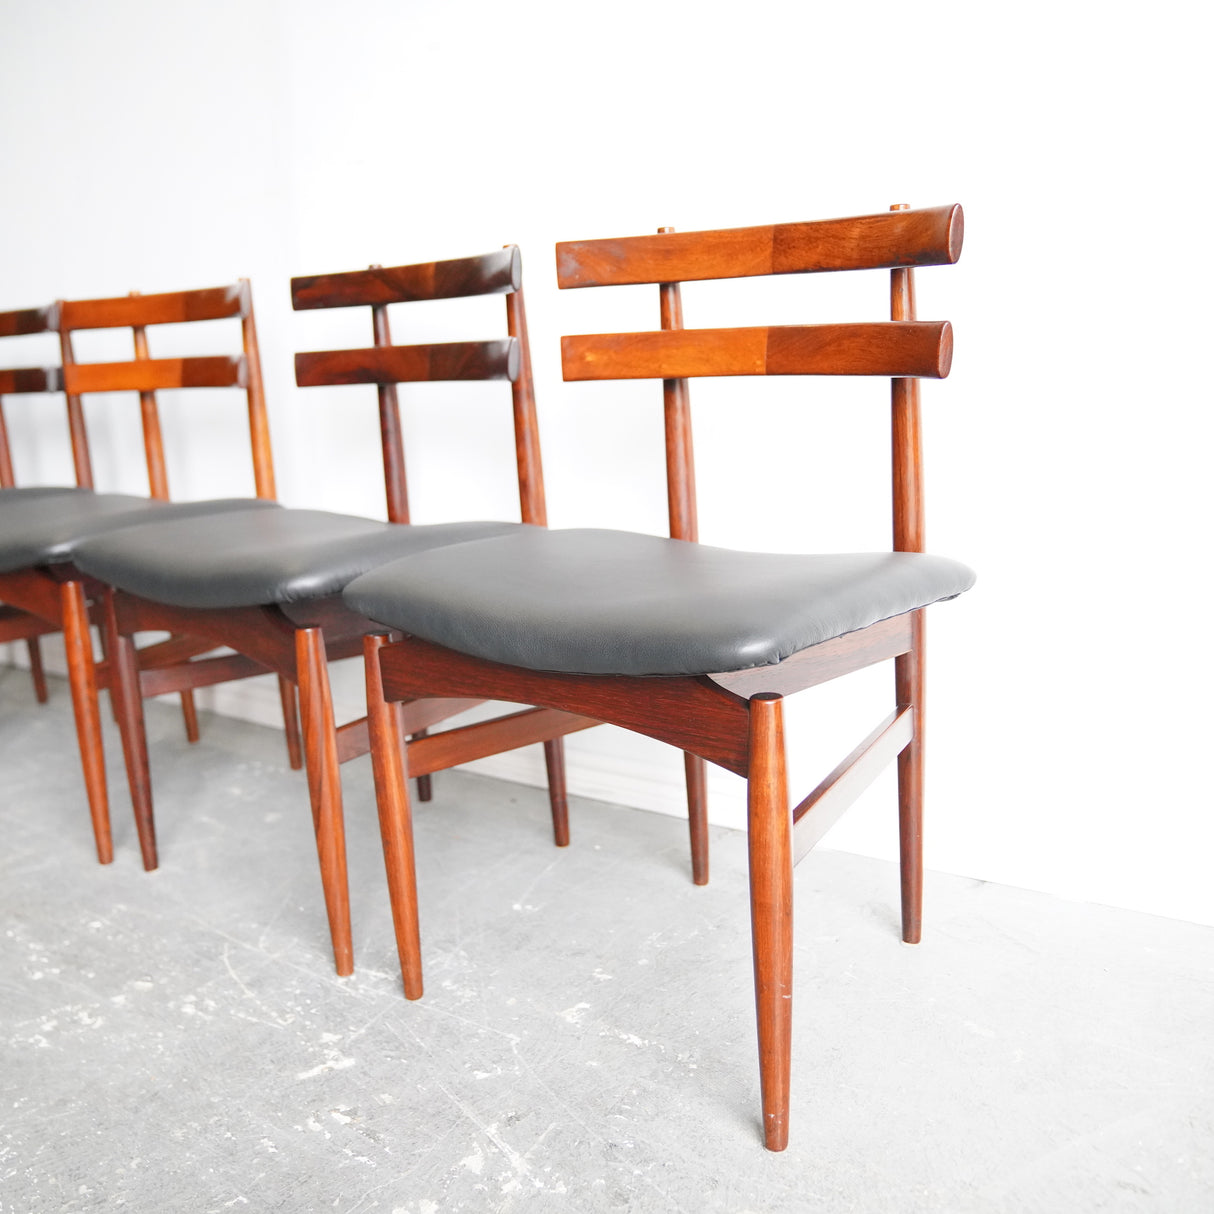 Vintage Danish Model 30 Dining Chairs by Poul Hundevad c.1950